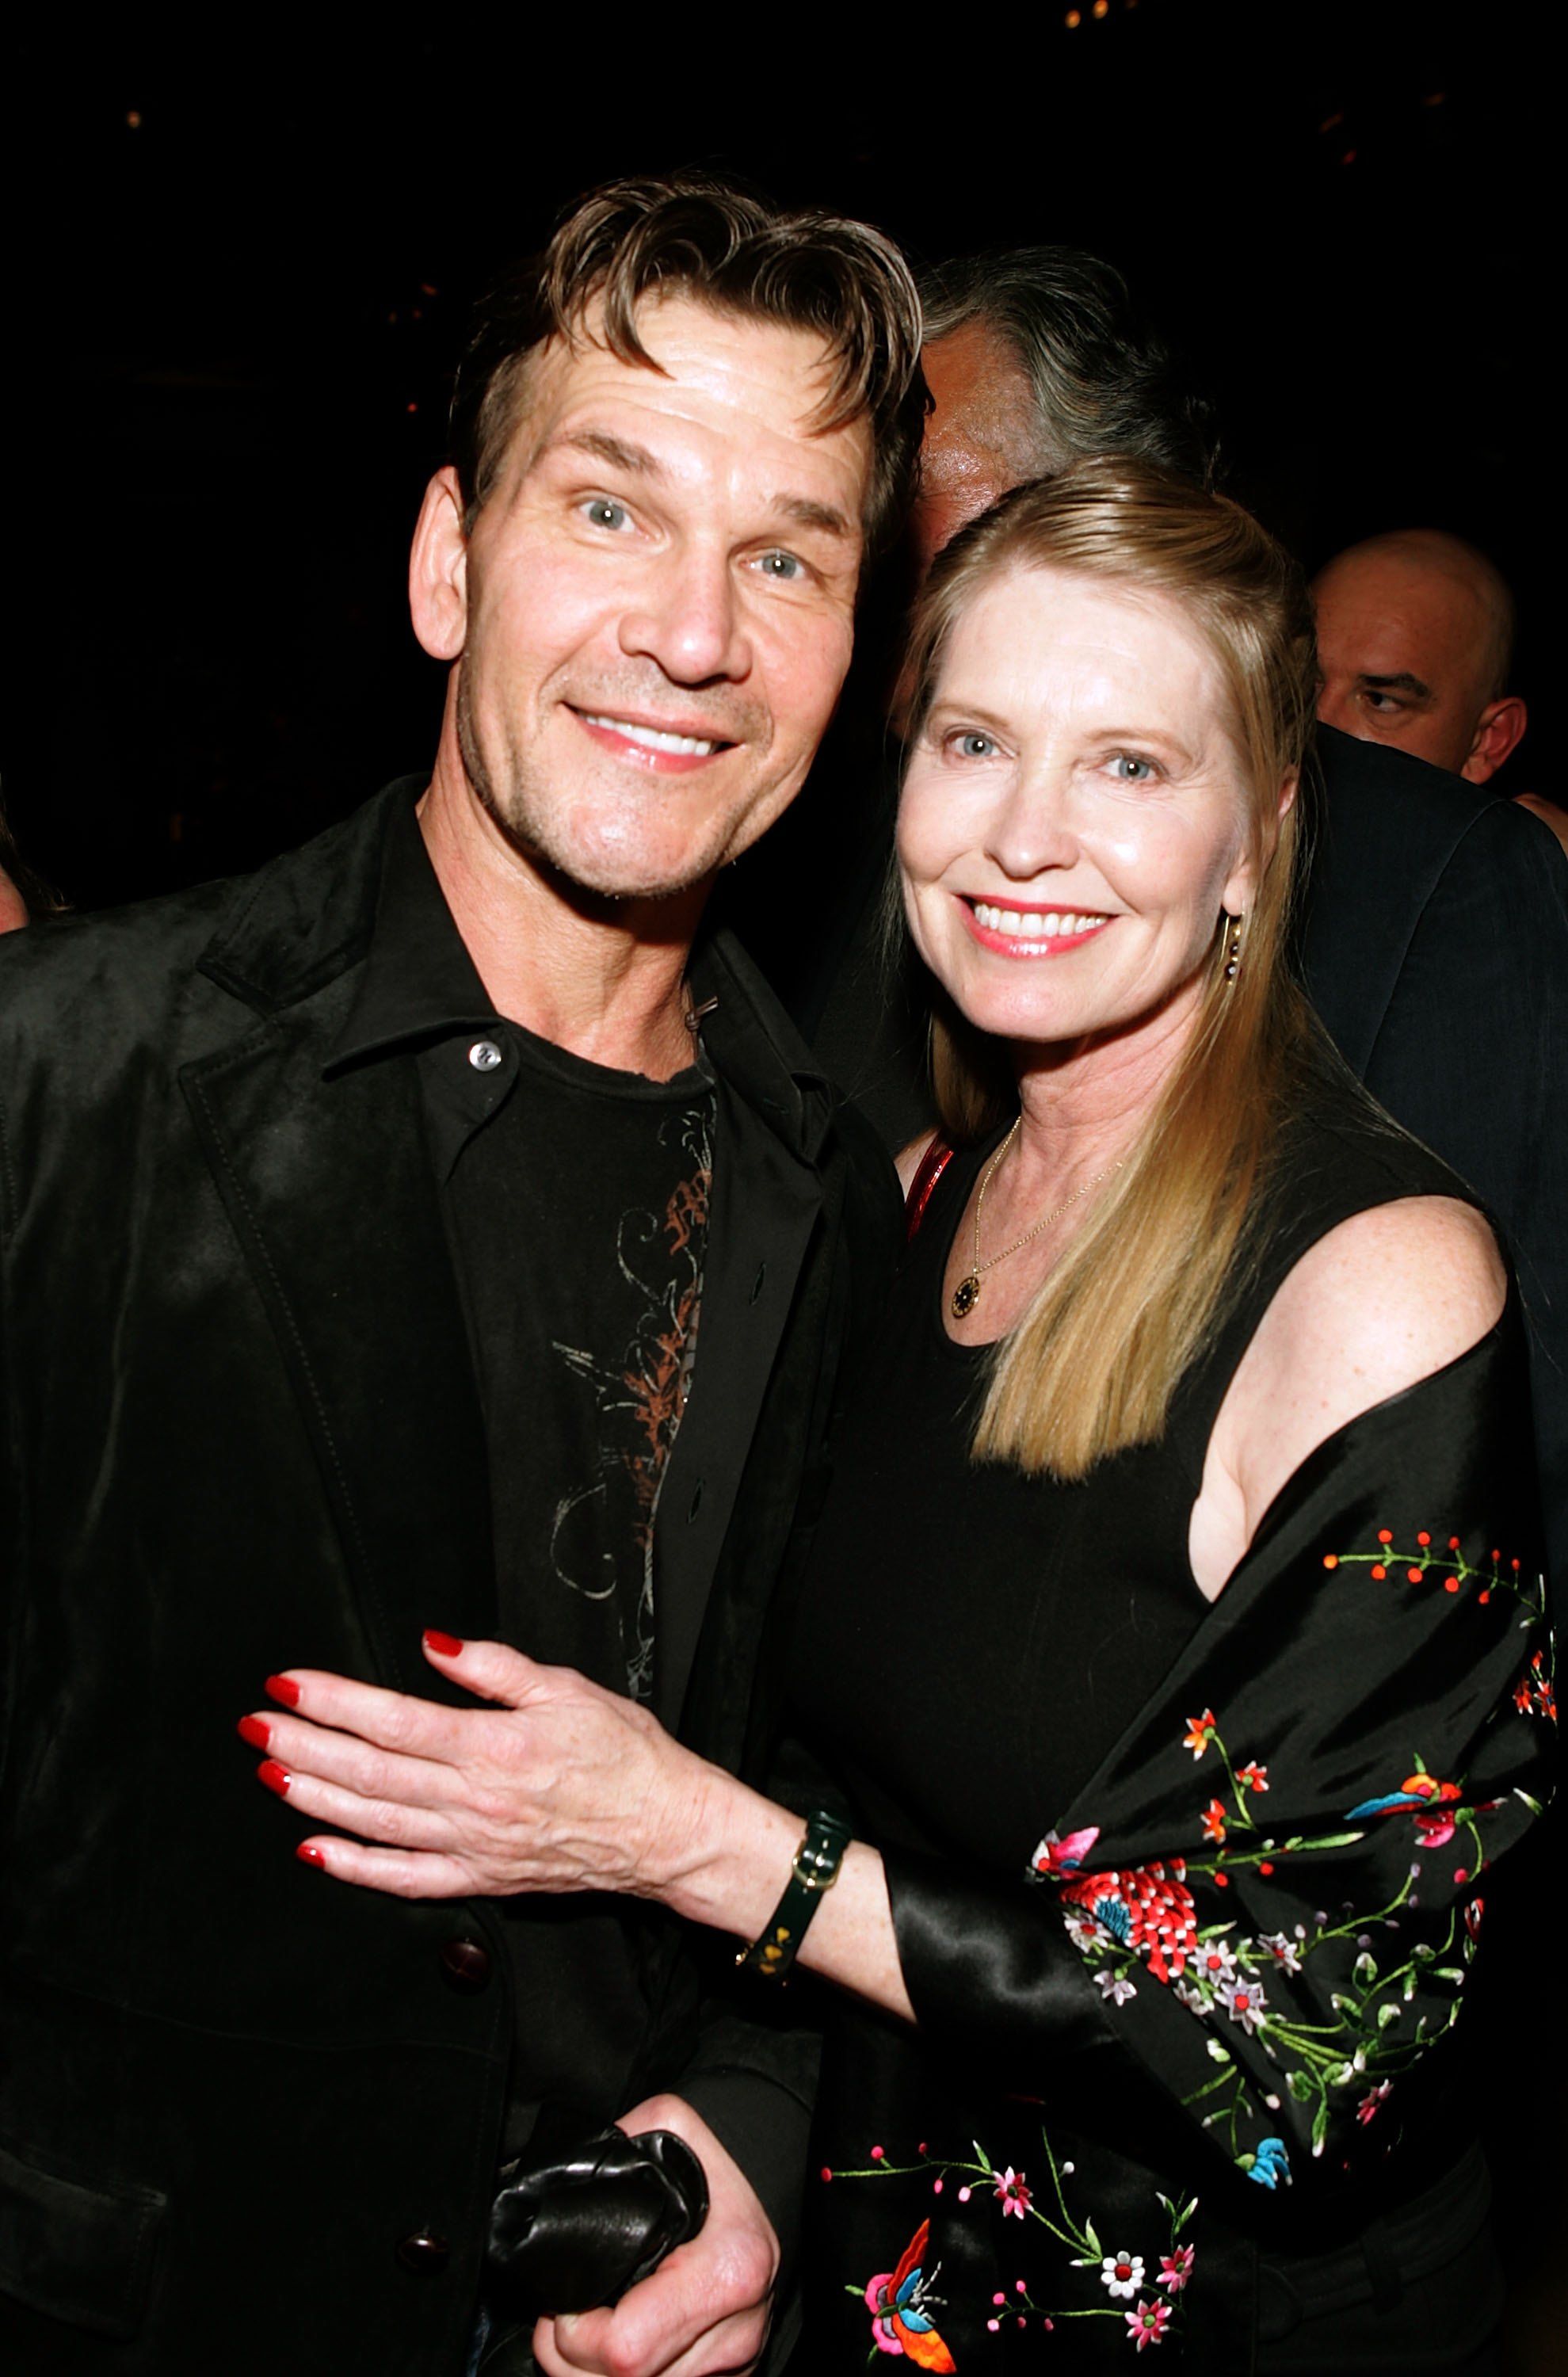 Patrick Swayze and wife Lisa Niemi pose at the premiere of "Rocky Balboa" on December 13, 2006, in Hollywood, California | Photo: Frazer Harrison/Getty Images